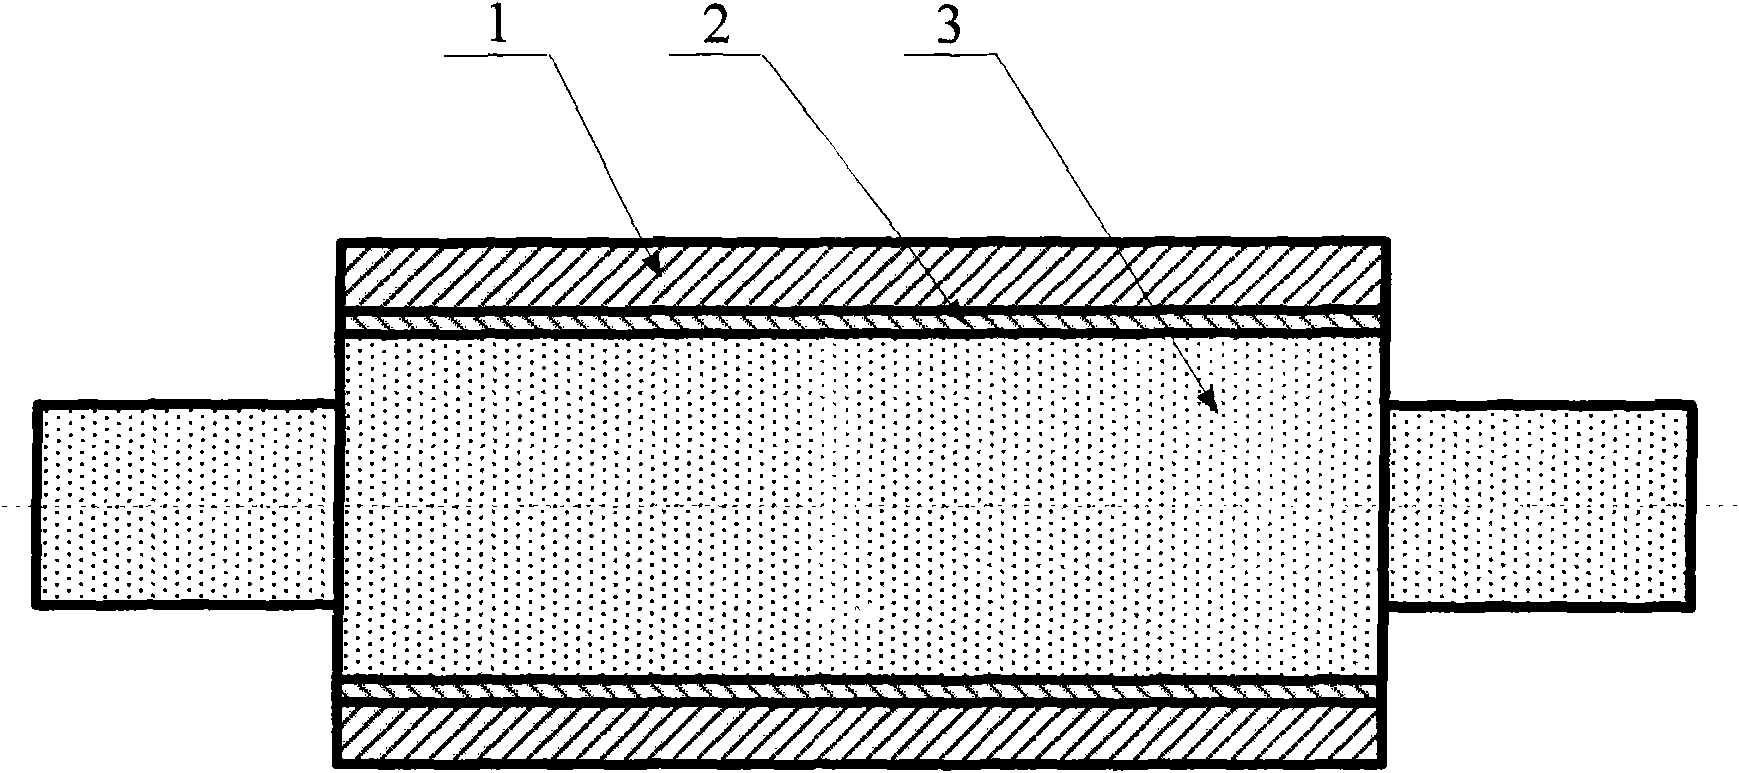 Material of intermediate layer for centrifugally casting boracic high-speed steel composite rolls